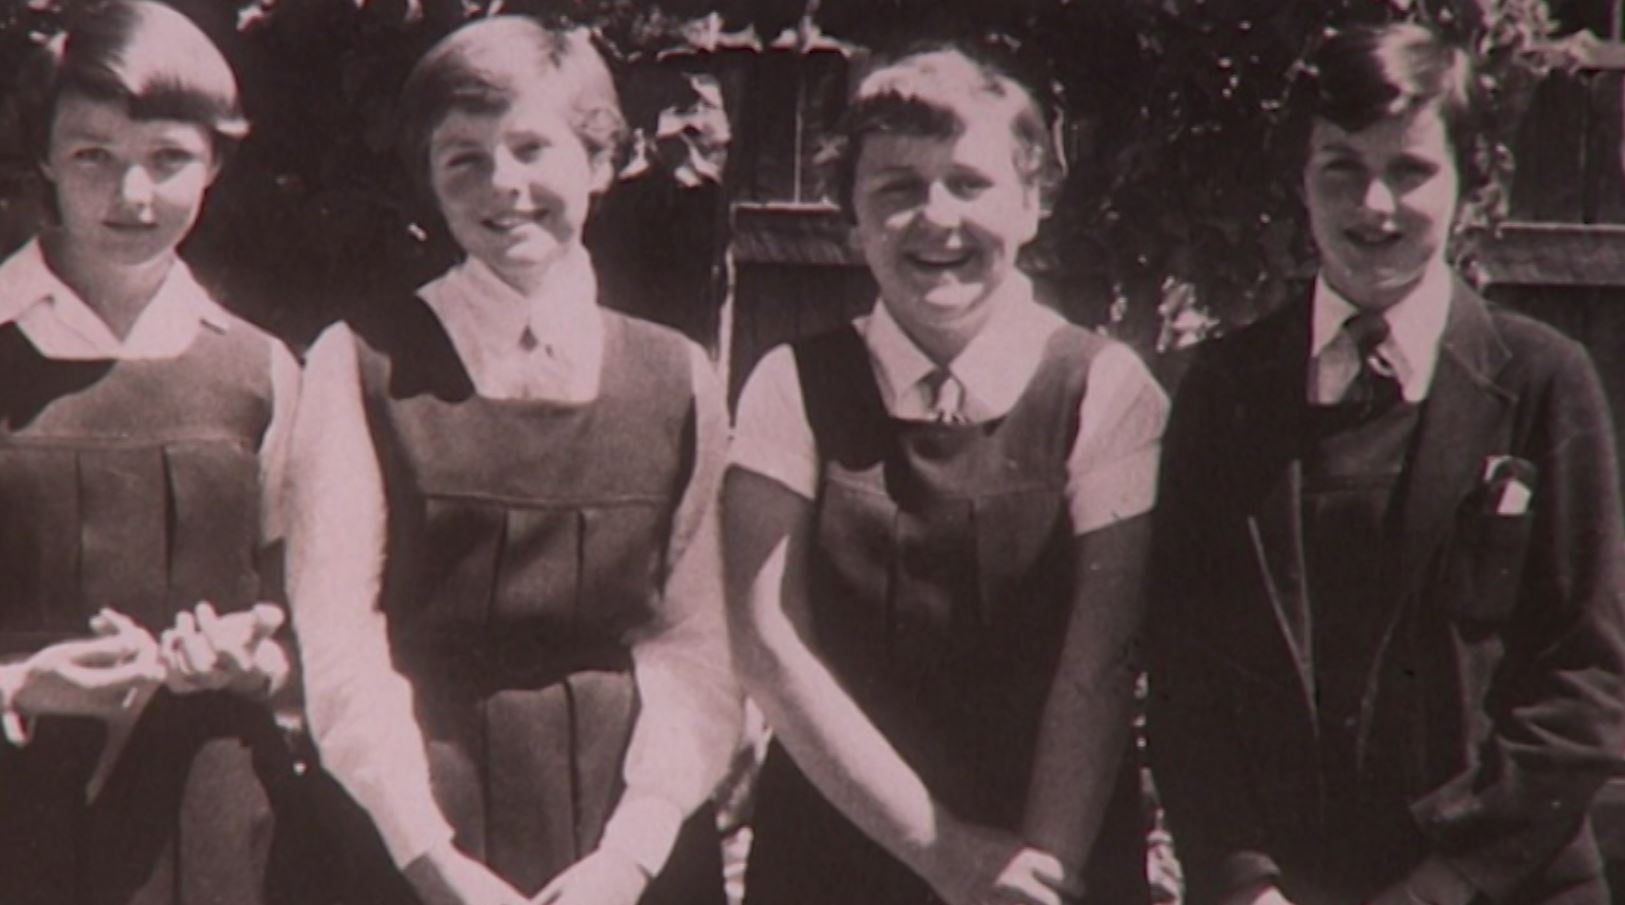 Black and white 1950s photograph of four school girls in uniform